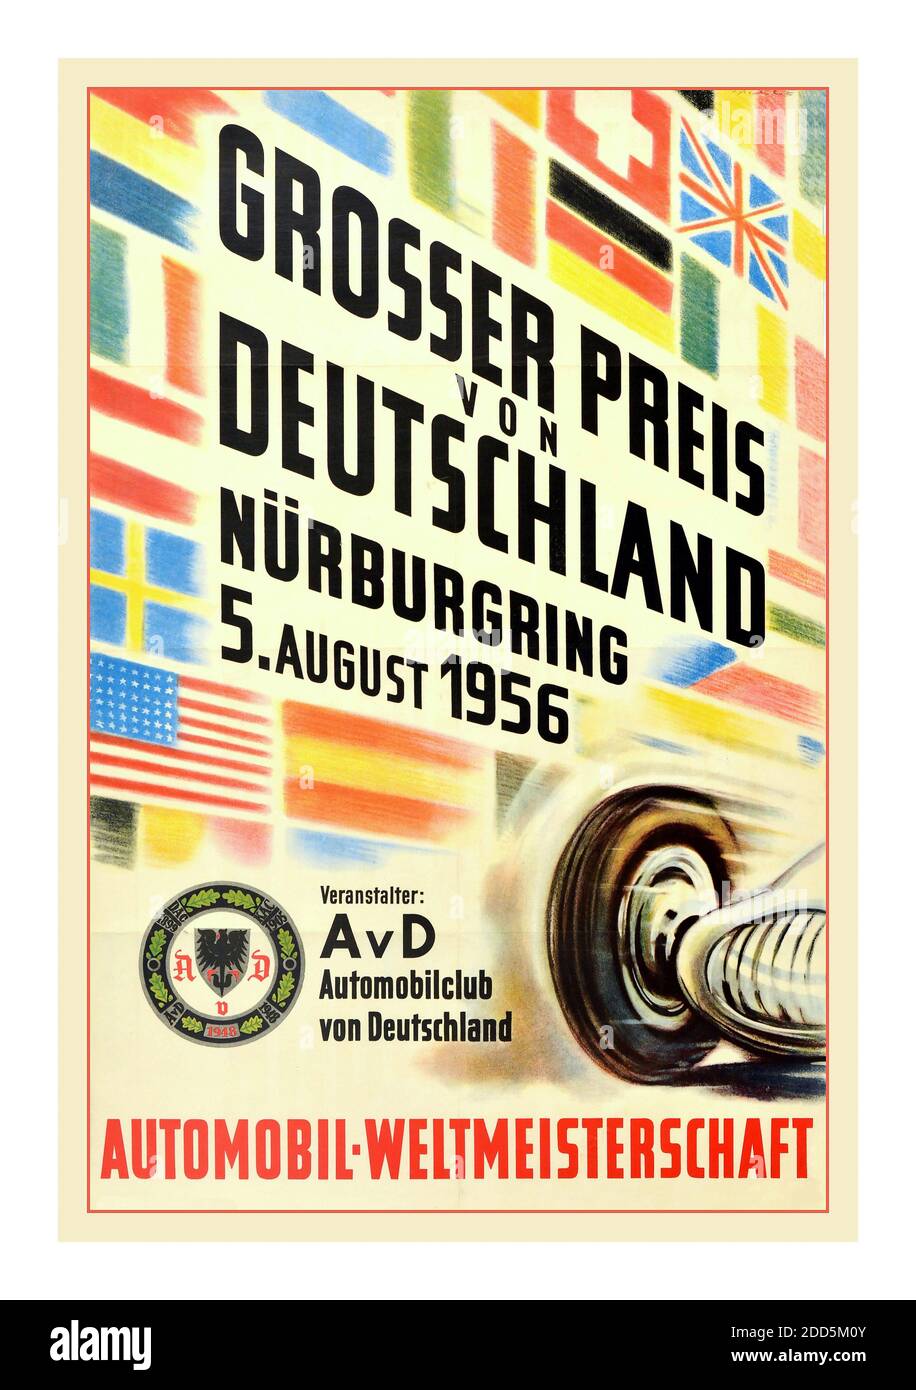 VINTAGE 1956 POSTER GERMAN GRAND PRIX NURBURGRING FORMULA ONE vintage F1 motor sport poster for the German Grand Prix - Grosser Preis Von Deutschland Nurburgring 5 August 1956 - Automobil Weltmeisterschaft / Grand Prix of Germany taking place at the Nurburgring on the 5 August 1956 - Automobile World Championship. -  Artwork features the national flags of the race participants with the front end and tyre of a Formula 1 race car. Issued by the Automobilclub von Deutschland.  Germany, designer: Ackle, year of printing: 1955 Stock Photo